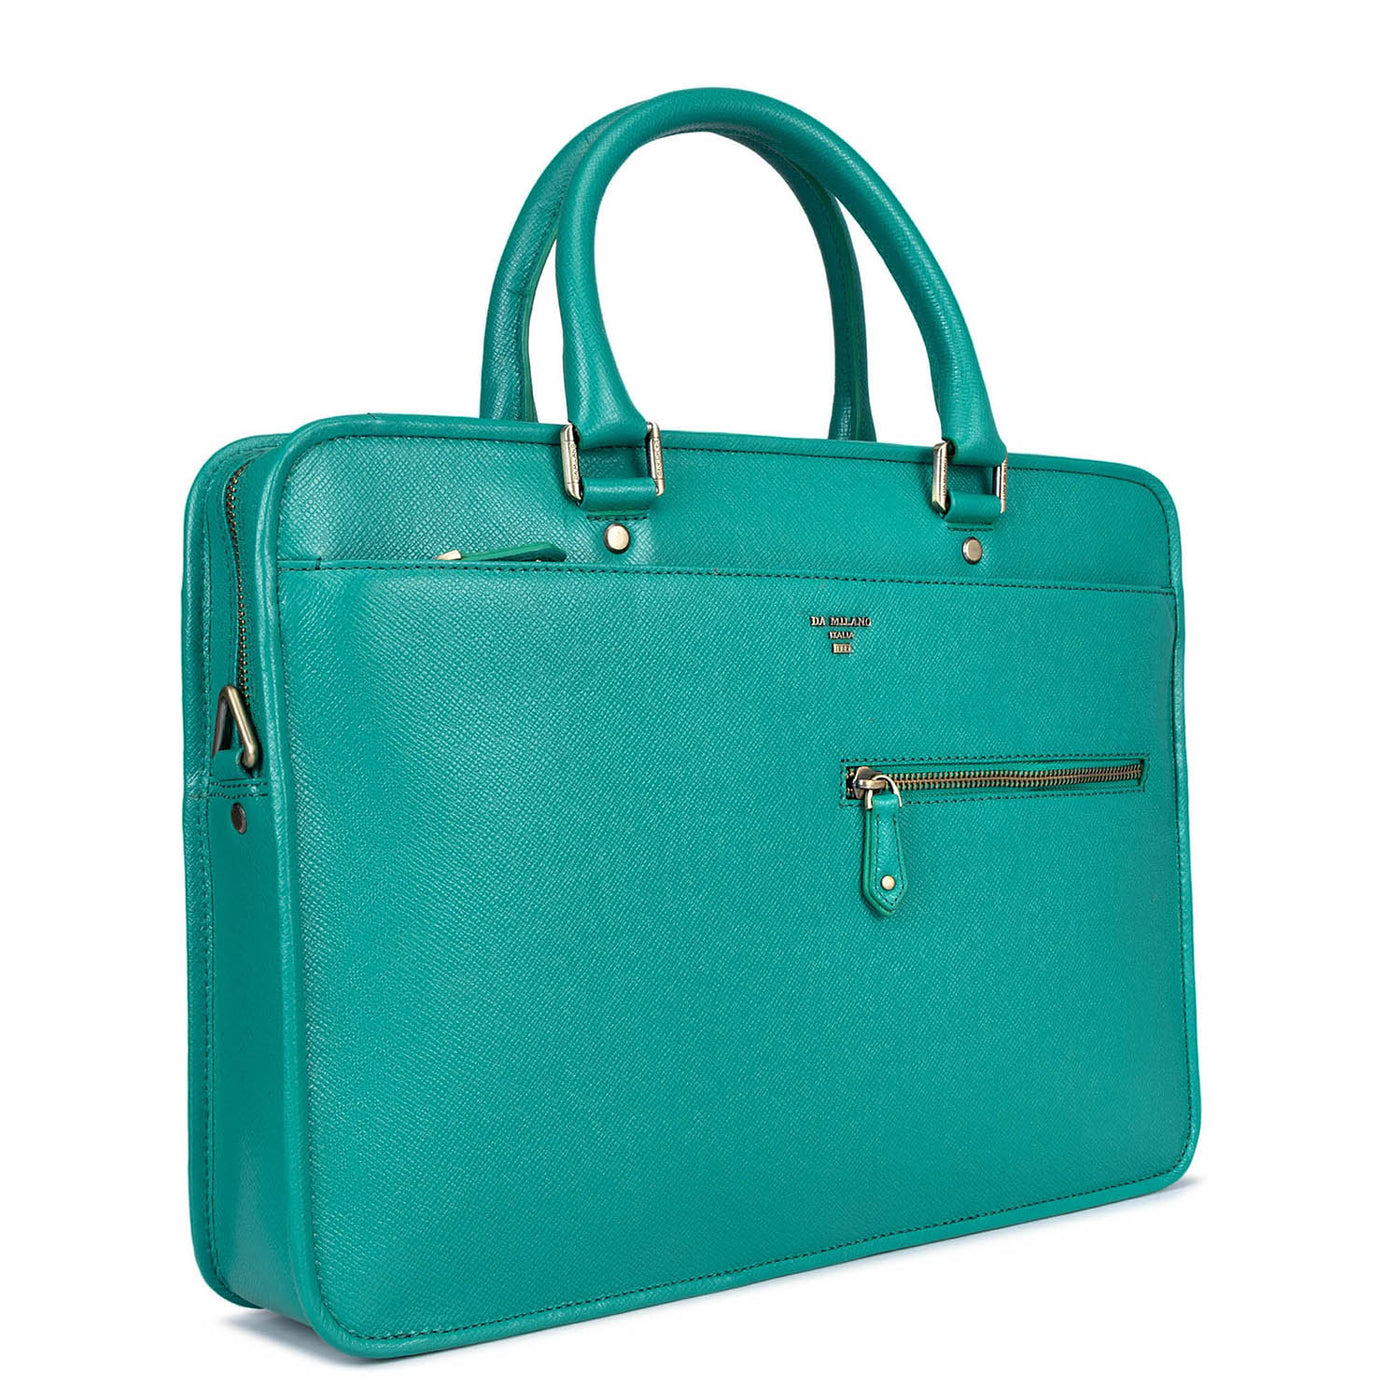 Green Franzy Leather Laptop Bag - Upto 14"